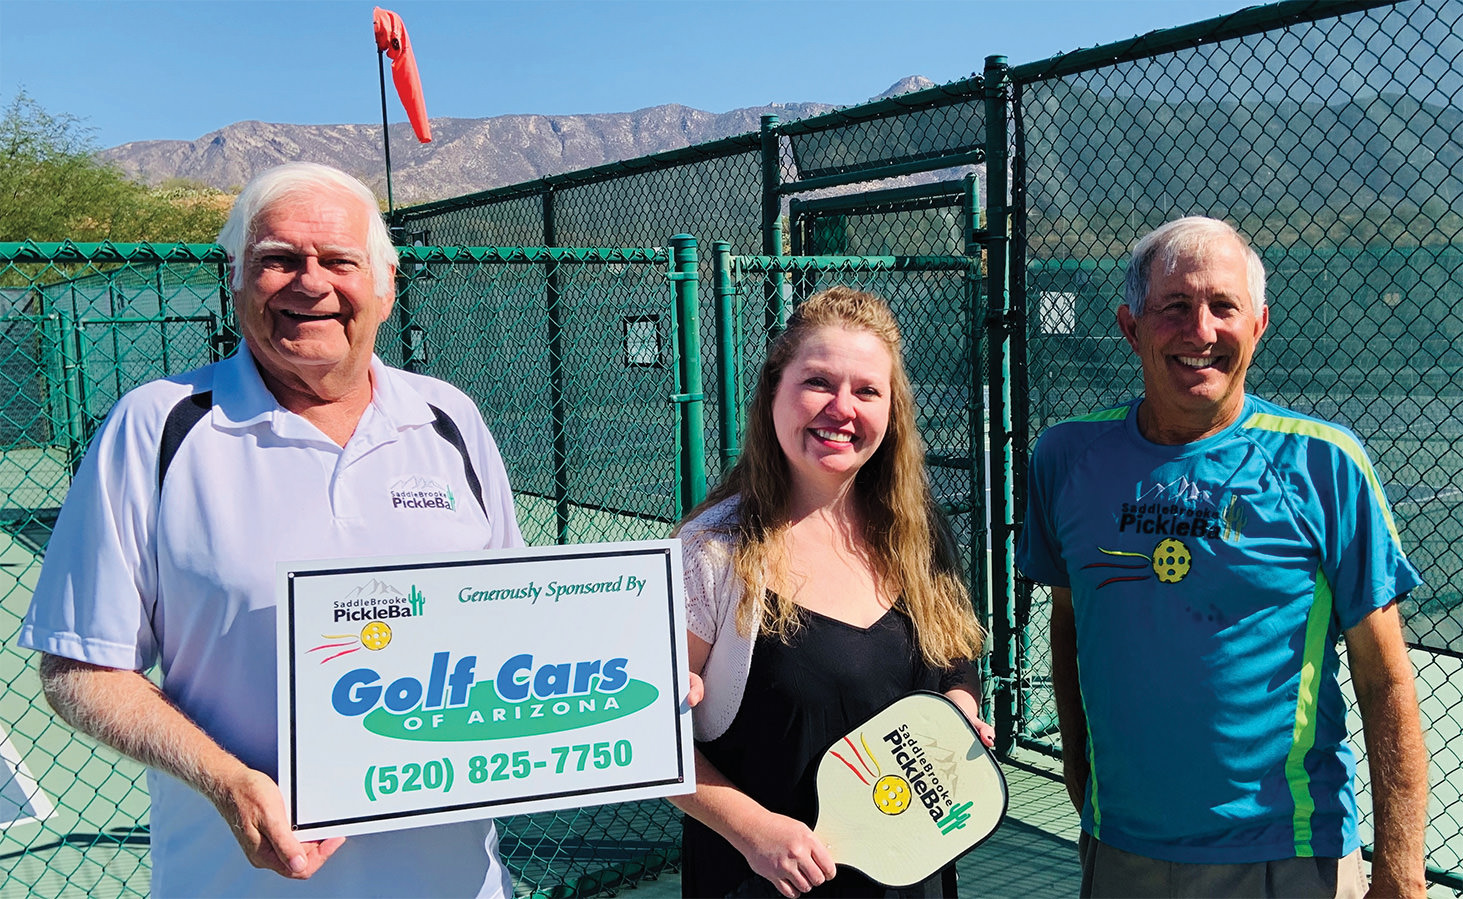 SPA co-chair of the fundraising committee, Jim Schlote; Golf Cars of Arizona Service Manager, Allison Honeycutt; SPA President, Peter Giljohann